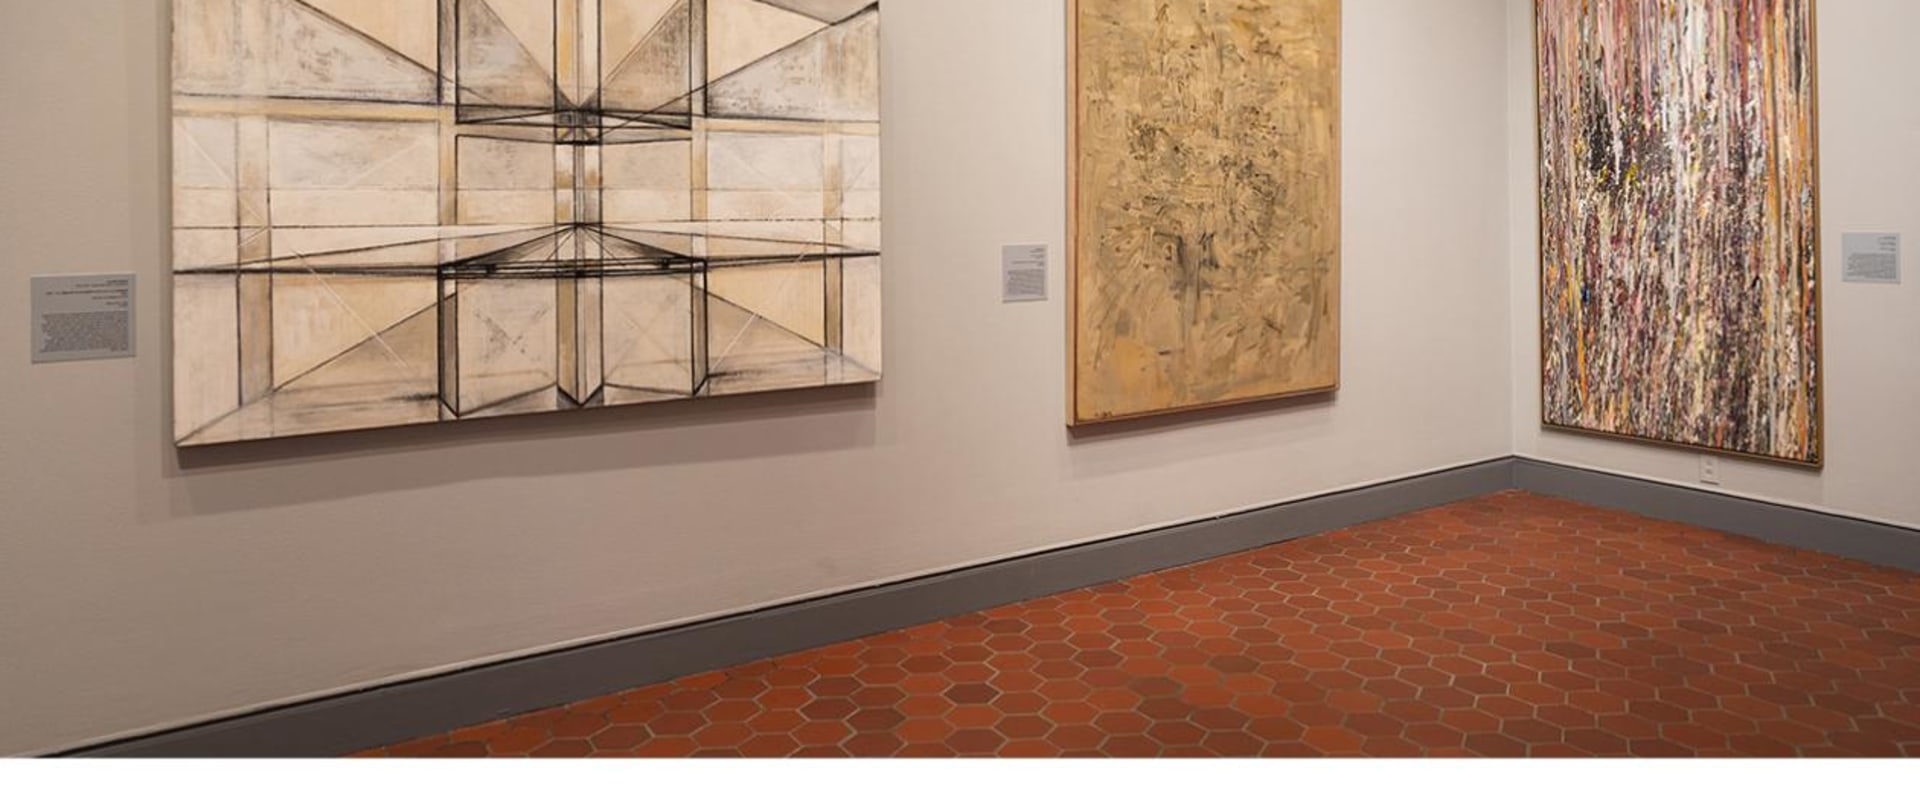 Discover the Art Scene in Manassas, VA with Virtual Tours and Online Exhibitions